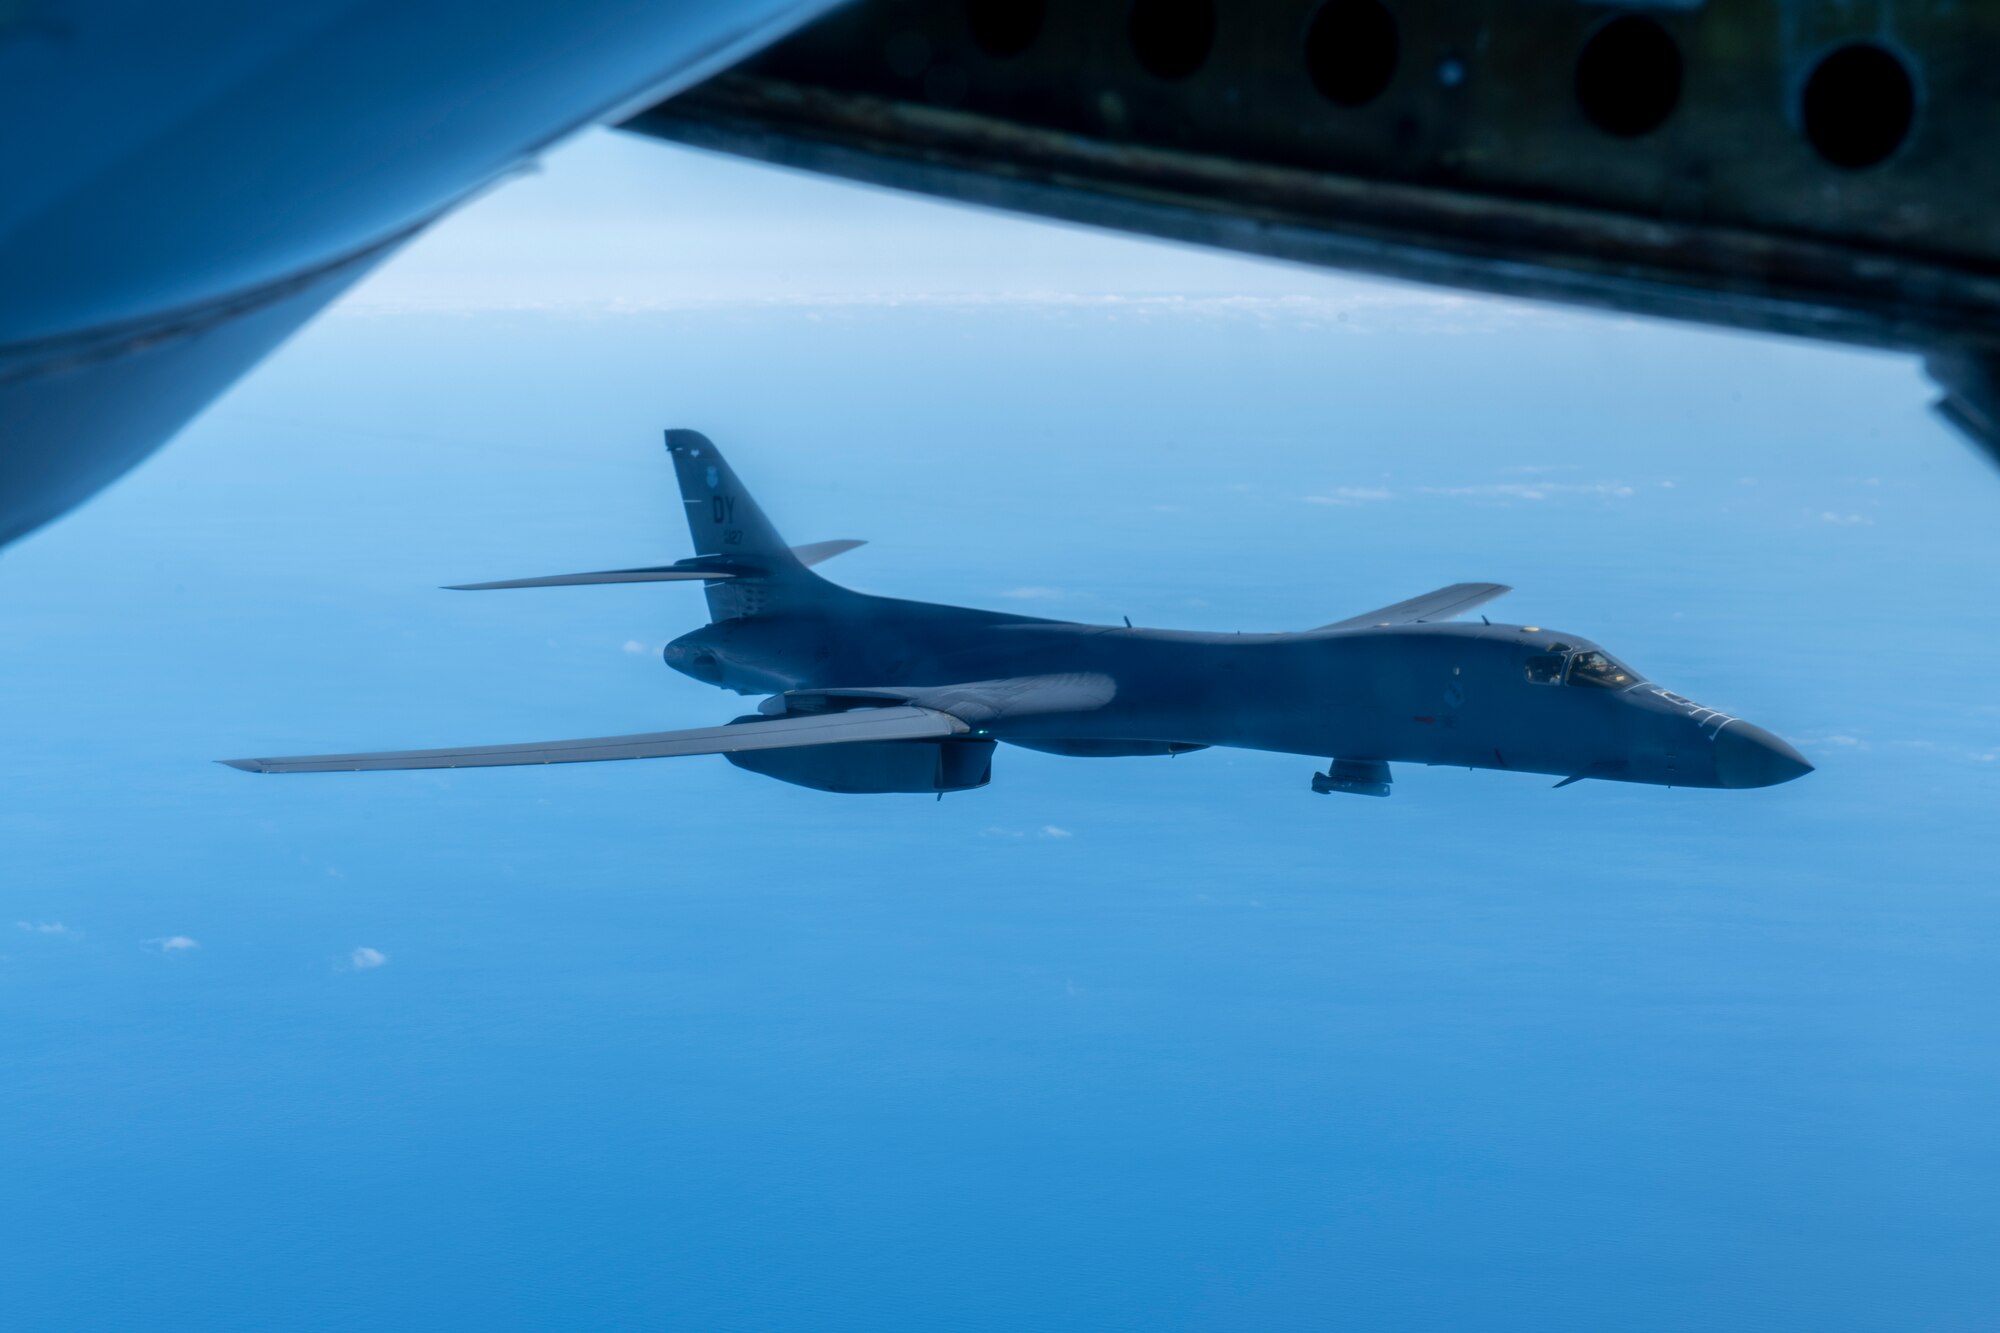 A B-1B Lancer from the 7th Bomb Wing departs after receiving fuel over the Pacific Ocean